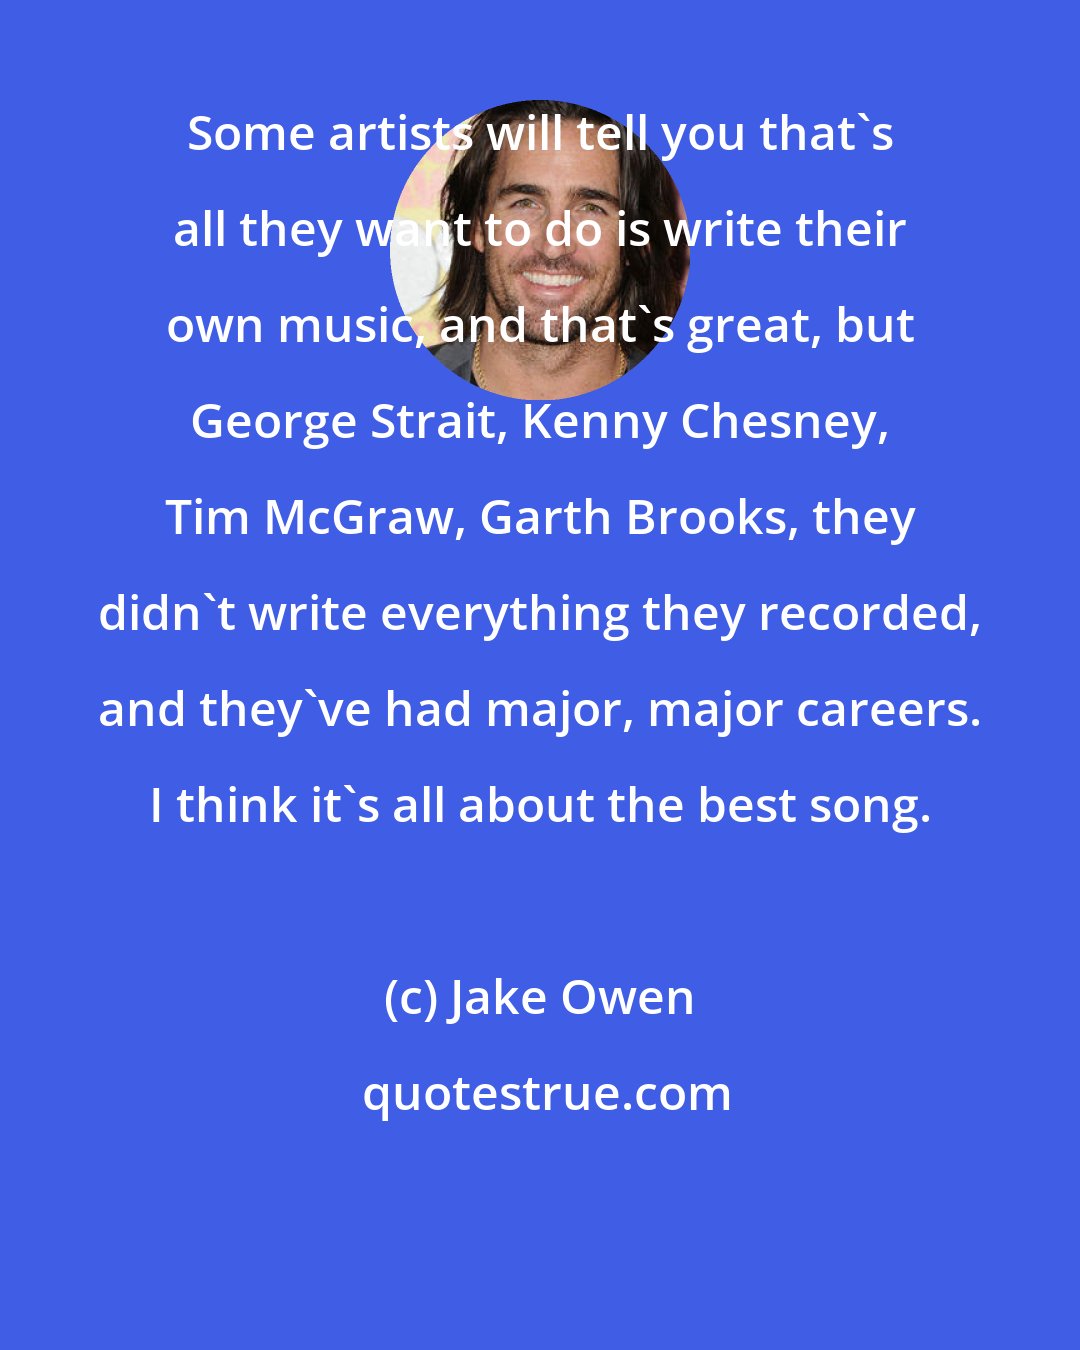 Jake Owen: Some artists will tell you that's all they want to do is write their own music, and that's great, but George Strait, Kenny Chesney, Tim McGraw, Garth Brooks, they didn't write everything they recorded, and they've had major, major careers. I think it's all about the best song.